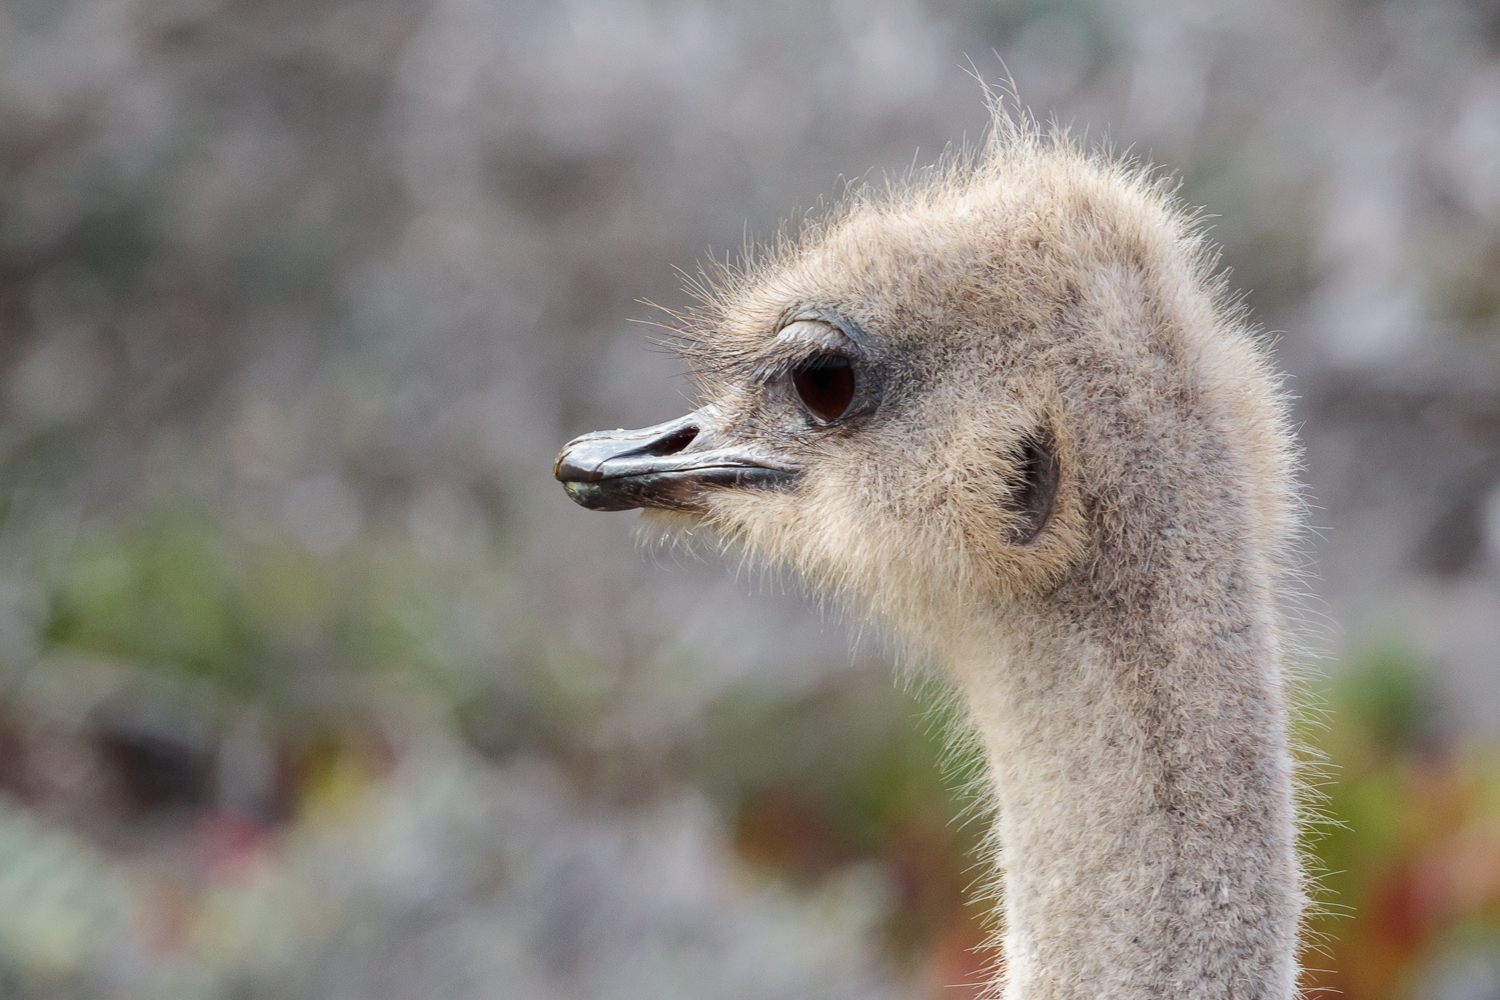 Ostrich - Cape of Good Hope